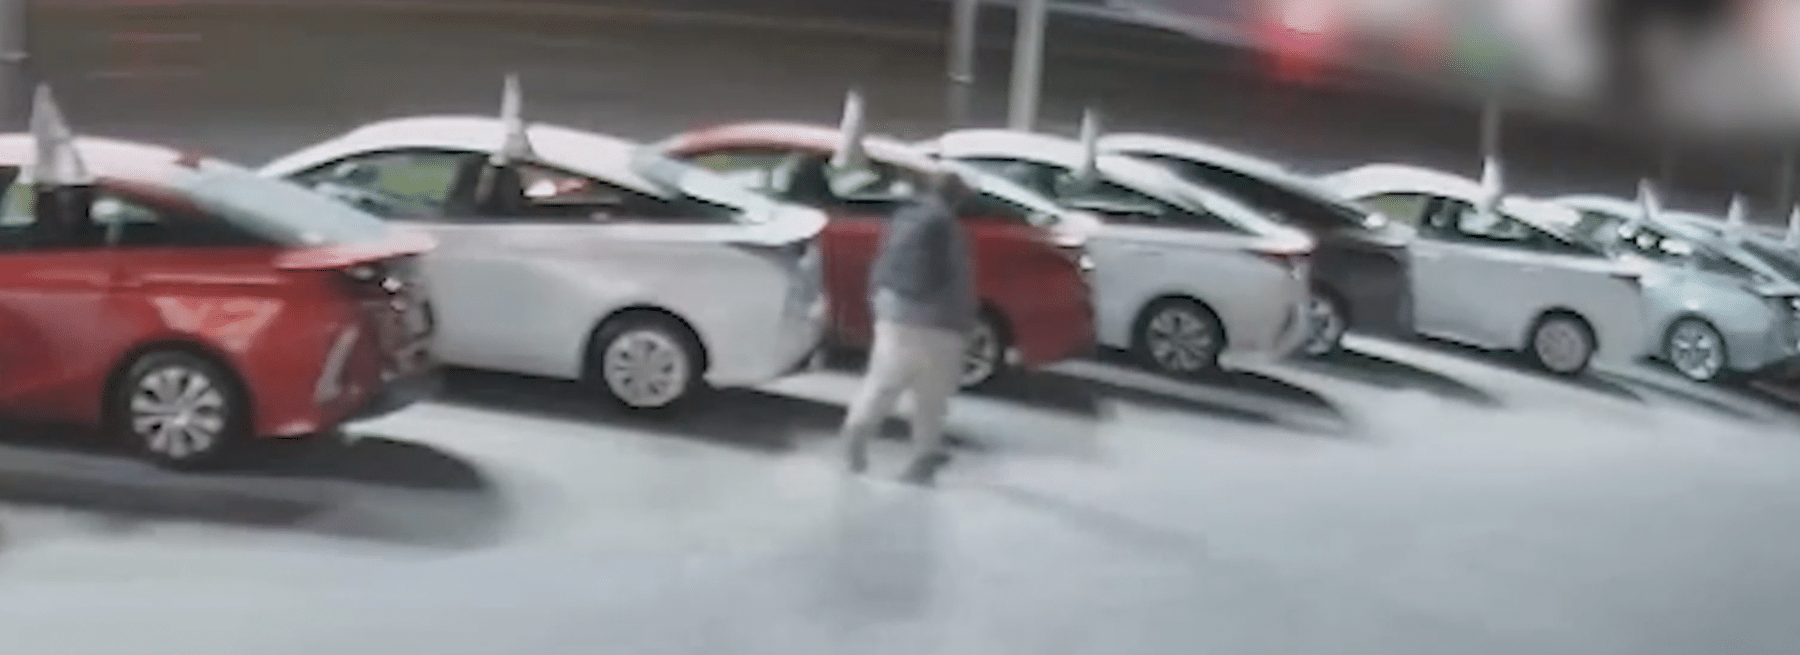 Late-night prowler at auto dealership